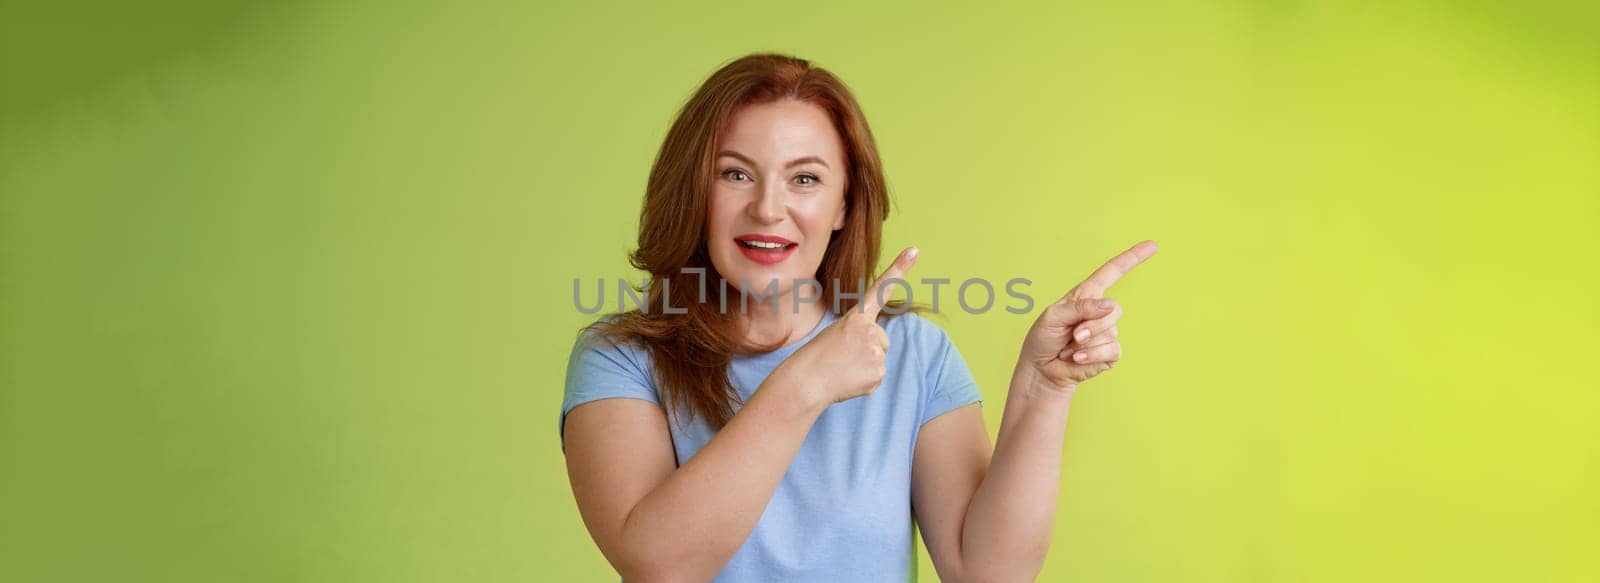 Curious enthusiastic gorgeous redhead female intrigued pointing upper left corner asking question interesting product talk shop assistant consulting promo stand green background blue t-shirt.